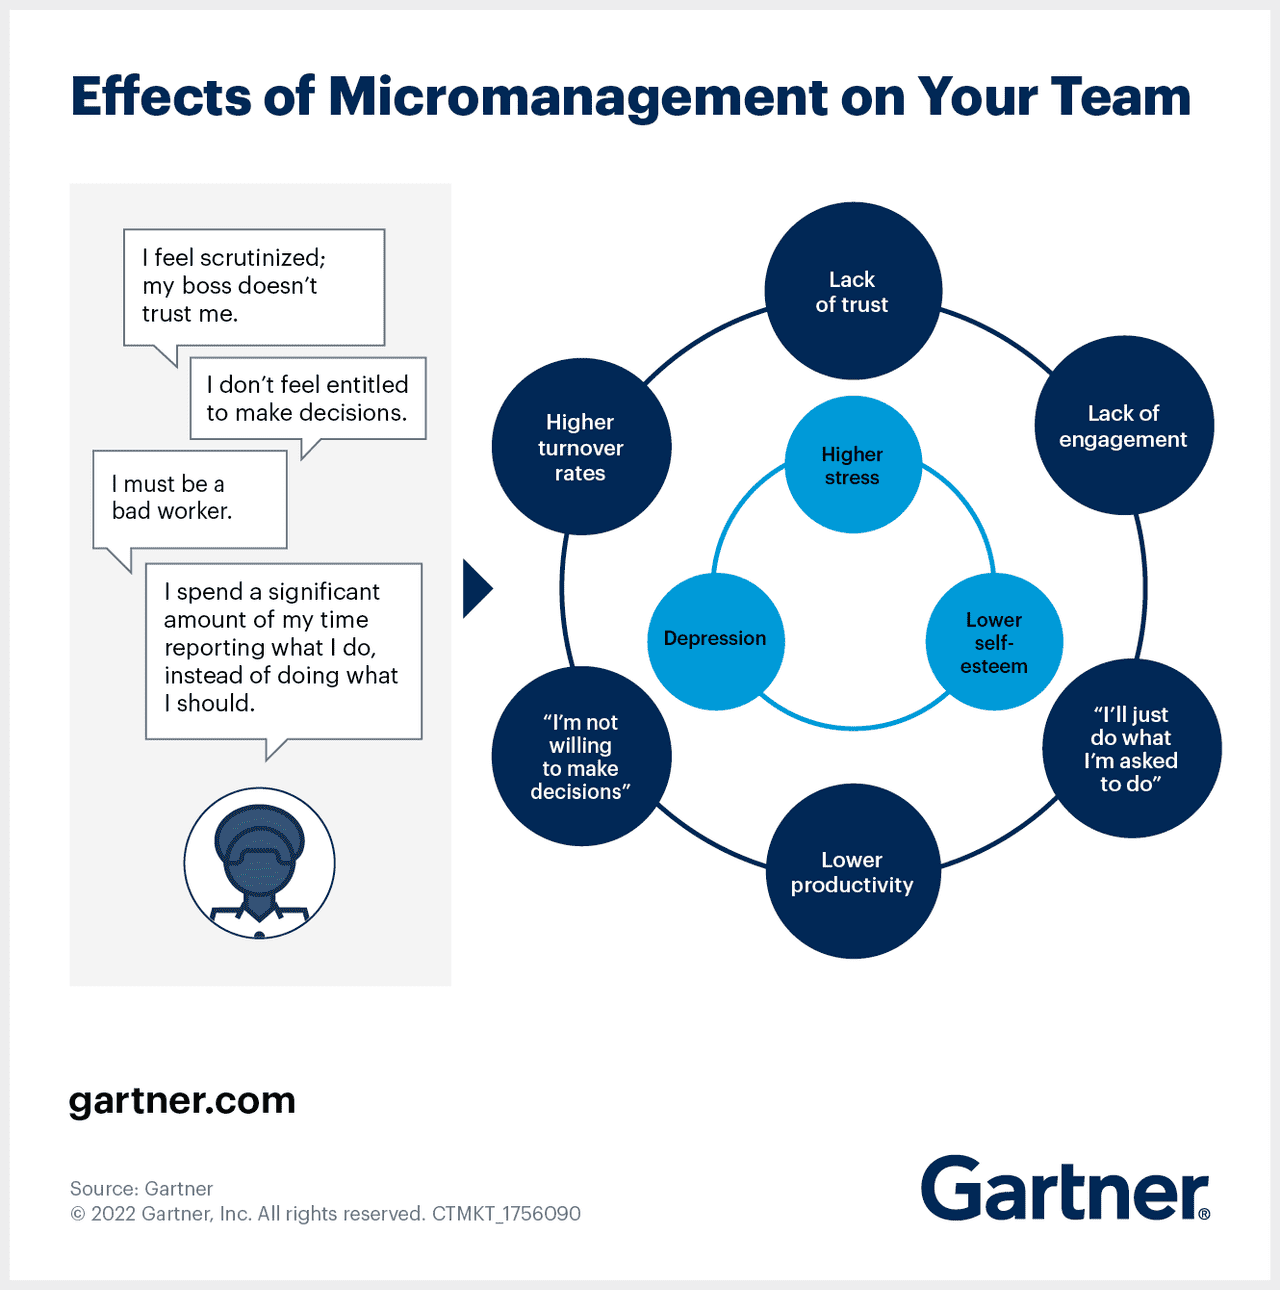 Gartner: effects of micromanagement on your team